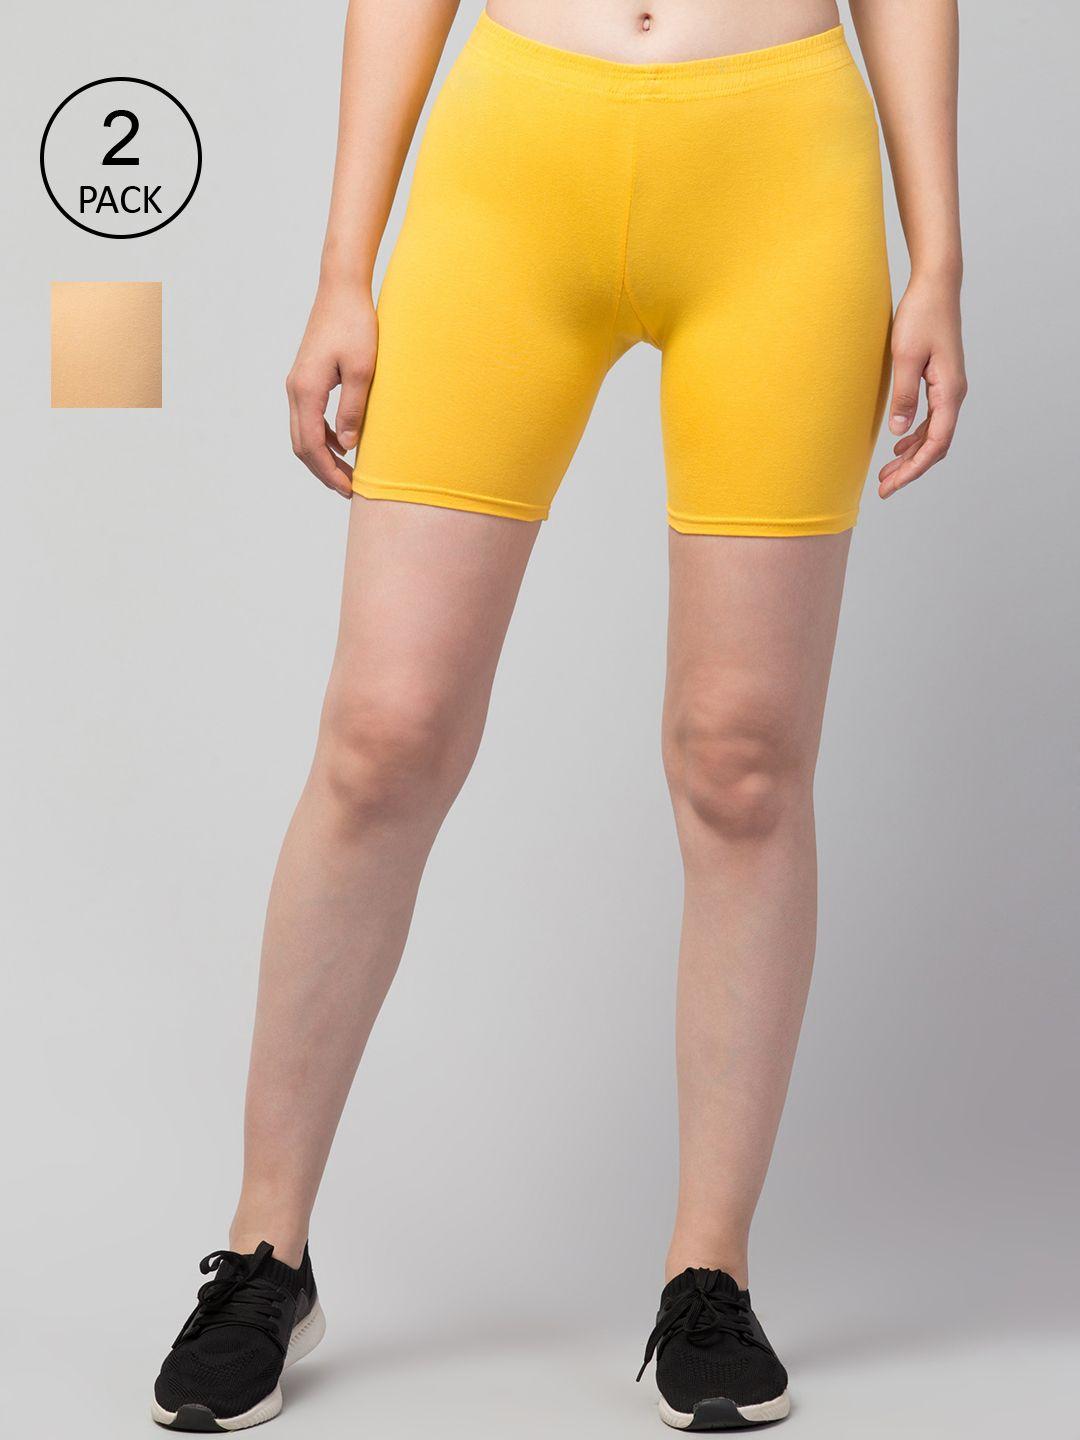 apraa & parma pack of 2 women yellow slim fit cycling sports shorts